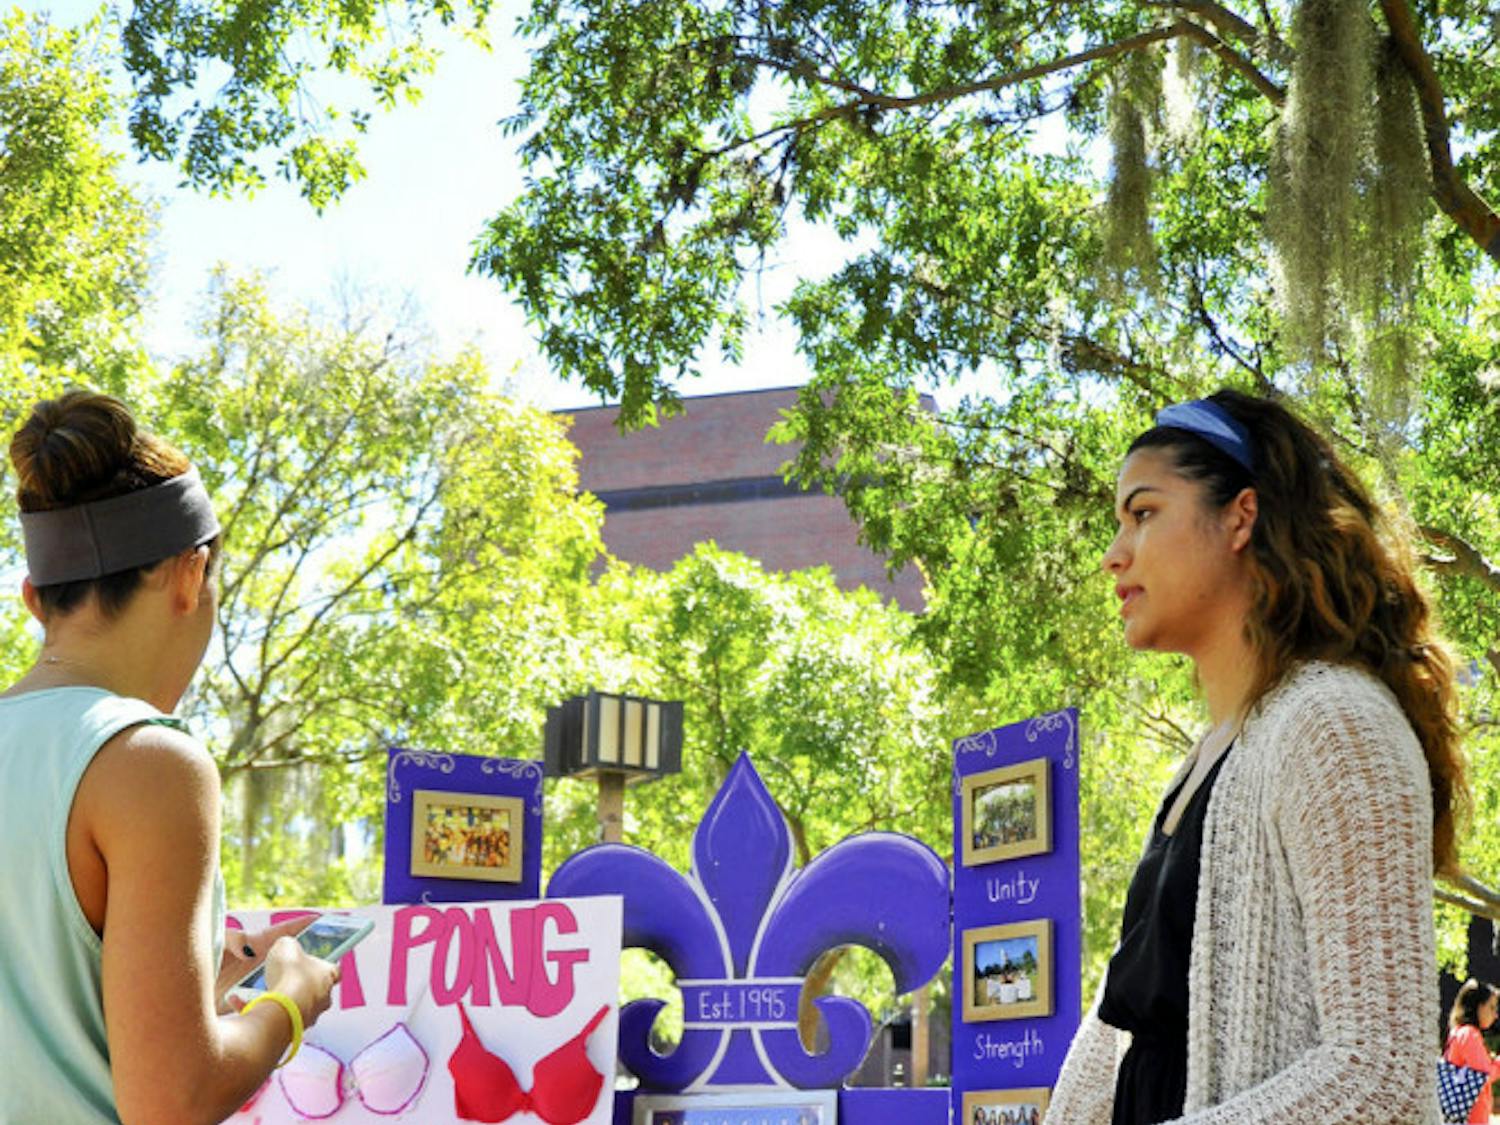 Gamma Eta sorority member Diana Rodriguez talks to Victoria Verdeja, a 21-year-old UF journalism student, about the organization’s Breast Cancer Awareness Week events. They have four events planned, including a benefit brunch Sunday called "Fasten Your Ribbon: The Breast is Yet to Come."